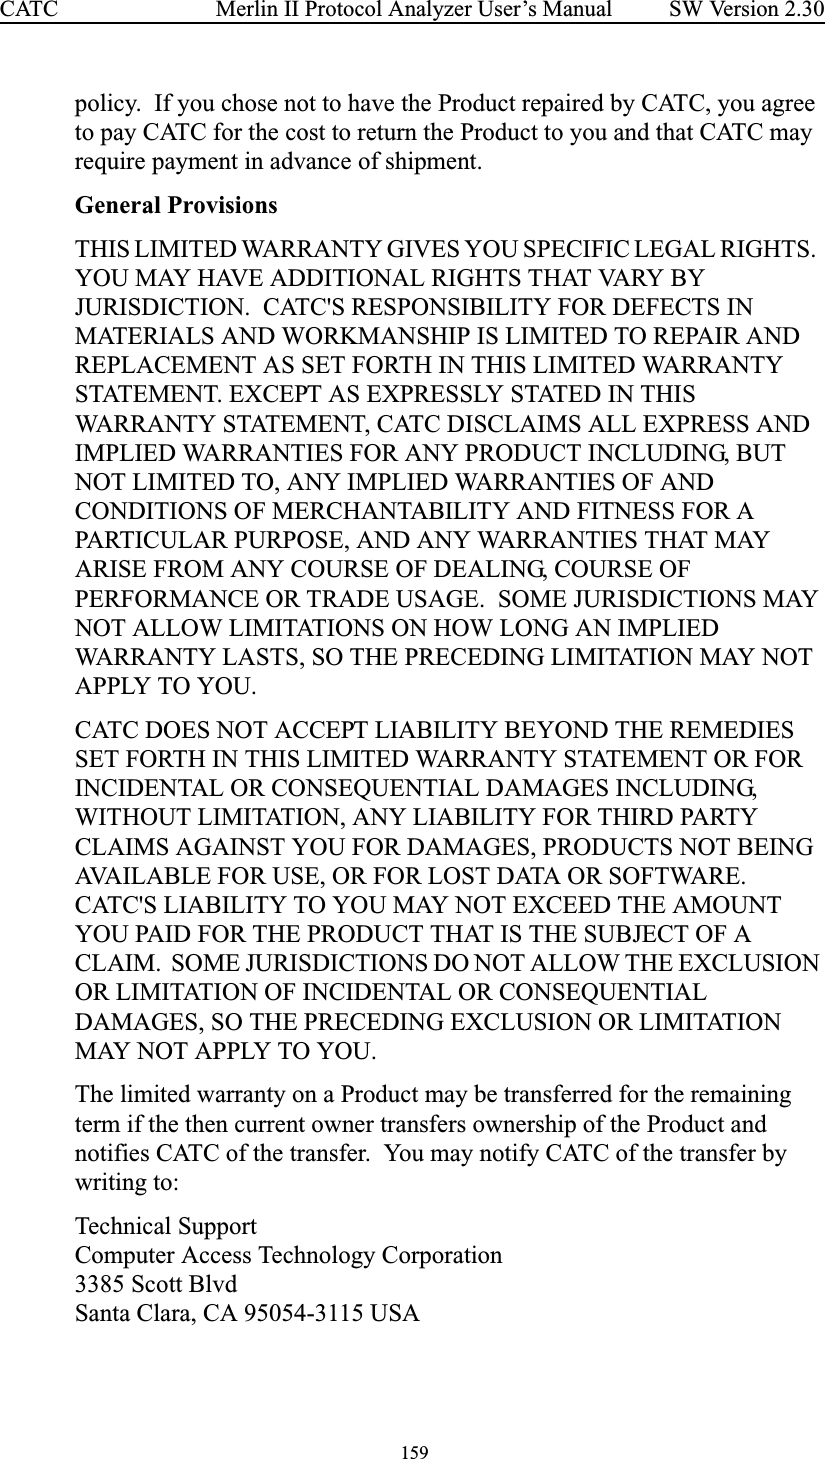  159 Merlin II Protocol Analyzer User’s ManualCATC SW Version 2.30policy.  If you chose not to have the Product repaired by CATC, you agree to pay CATC for the cost to return the Product to you and that CATC may require payment in advance of shipment.General ProvisionsTHIS LIMITED WARRANTY GIVES YOU SPECIFIC LEGAL RIGHTS.  YOU MAY HAVE ADDITIONAL RIGHTS THAT VARY BY JURISDICTION.  CATC&apos;S RESPONSIBILITY FOR DEFECTS IN MATERIALS AND WORKMANSHIP IS LIMITED TO REPAIR AND REPLACEMENT AS SET FORTH IN THIS LIMITED WARRANTY STATEMENT. EXCEPT AS EXPRESSLY STATED IN THIS WARRANTY STATEMENT, CATC DISCLAIMS ALL EXPRESS AND IMPLIED WARRANTIES FOR ANY PRODUCT INCLUDING, BUT NOT LIMITED TO, ANY IMPLIED WARRANTIES OF AND CONDITIONS OF MERCHANTABILITY AND FITNESS FOR A PARTICULAR PURPOSE, AND ANY WARRANTIES THAT MAY ARISE FROM ANY COURSE OF DEALING, COURSE OF PERFORMANCE OR TRADE USAGE.  SOME JURISDICTIONS MAY NOT ALLOW LIMITATIONS ON HOW LONG AN IMPLIED WARRANTY LASTS, SO THE PRECEDING LIMITATION MAY NOT APPLY TO YOU.CATC DOES NOT ACCEPT LIABILITY BEYOND THE REMEDIES SET FORTH IN THIS LIMITED WARRANTY STATEMENT OR FOR INCIDENTAL OR CONSEQUENTIAL DAMAGES INCLUDING, WITHOUT LIMITATION, ANY LIABILITY FOR THIRD PARTY CLAIMS AGAINST YOU FOR DAMAGES, PRODUCTS NOT BEING AVAILABLE FOR USE, OR FOR LOST DATA OR SOFTWARE.  CATC&apos;S LIABILITY TO YOU MAY NOT EXCEED THE AMOUNT YOU PAID FOR THE PRODUCT THAT IS THE SUBJECT OF A CLAIM.  SOME JURISDICTIONS DO NOT ALLOW THE EXCLUSION OR LIMITATION OF INCIDENTAL OR CONSEQUENTIAL DAMAGES, SO THE PRECEDING EXCLUSION OR LIMITATION MAY NOT APPLY TO YOU.The limited warranty on a Product may be transferred for the remaining term if the then current owner transfers ownership of the Product and notifies CATC of the transfer.  You may notify CATC of the transfer by writing to:Technical SupportComputer Access Technology Corporation 3385 Scott BlvdSanta Clara, CA 95054-3115 USA 